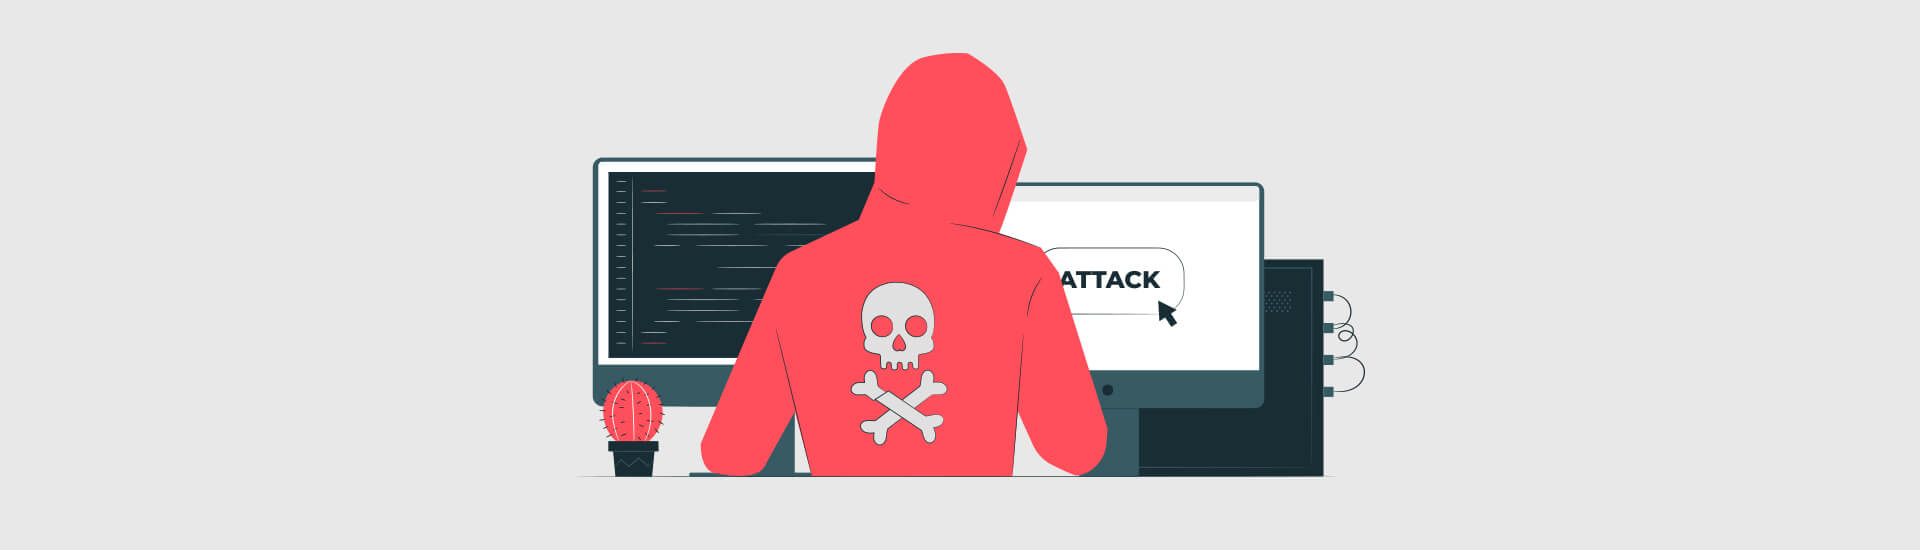 protecting your website against domain attacks | Laser Red